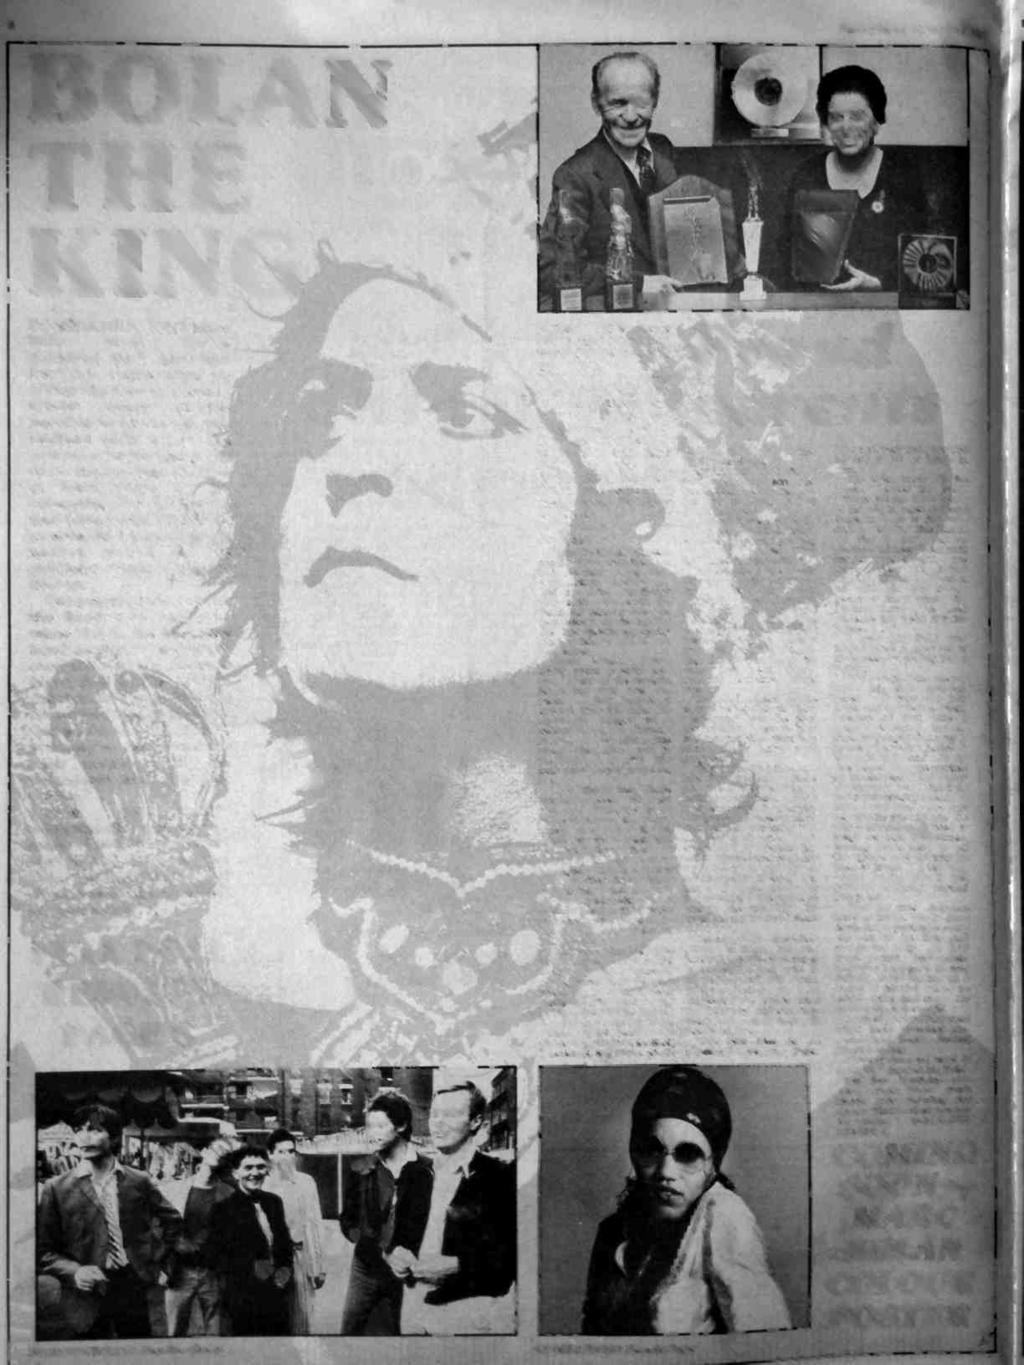 ' e rur BOLAN _! Ad Record Mrror, January 4, WS,7 CONGRATULATONS Marc Bolan fans! You've acheved your am and kept hs name alve by gvng hm the top place n almost every secton possble for hm to wn.